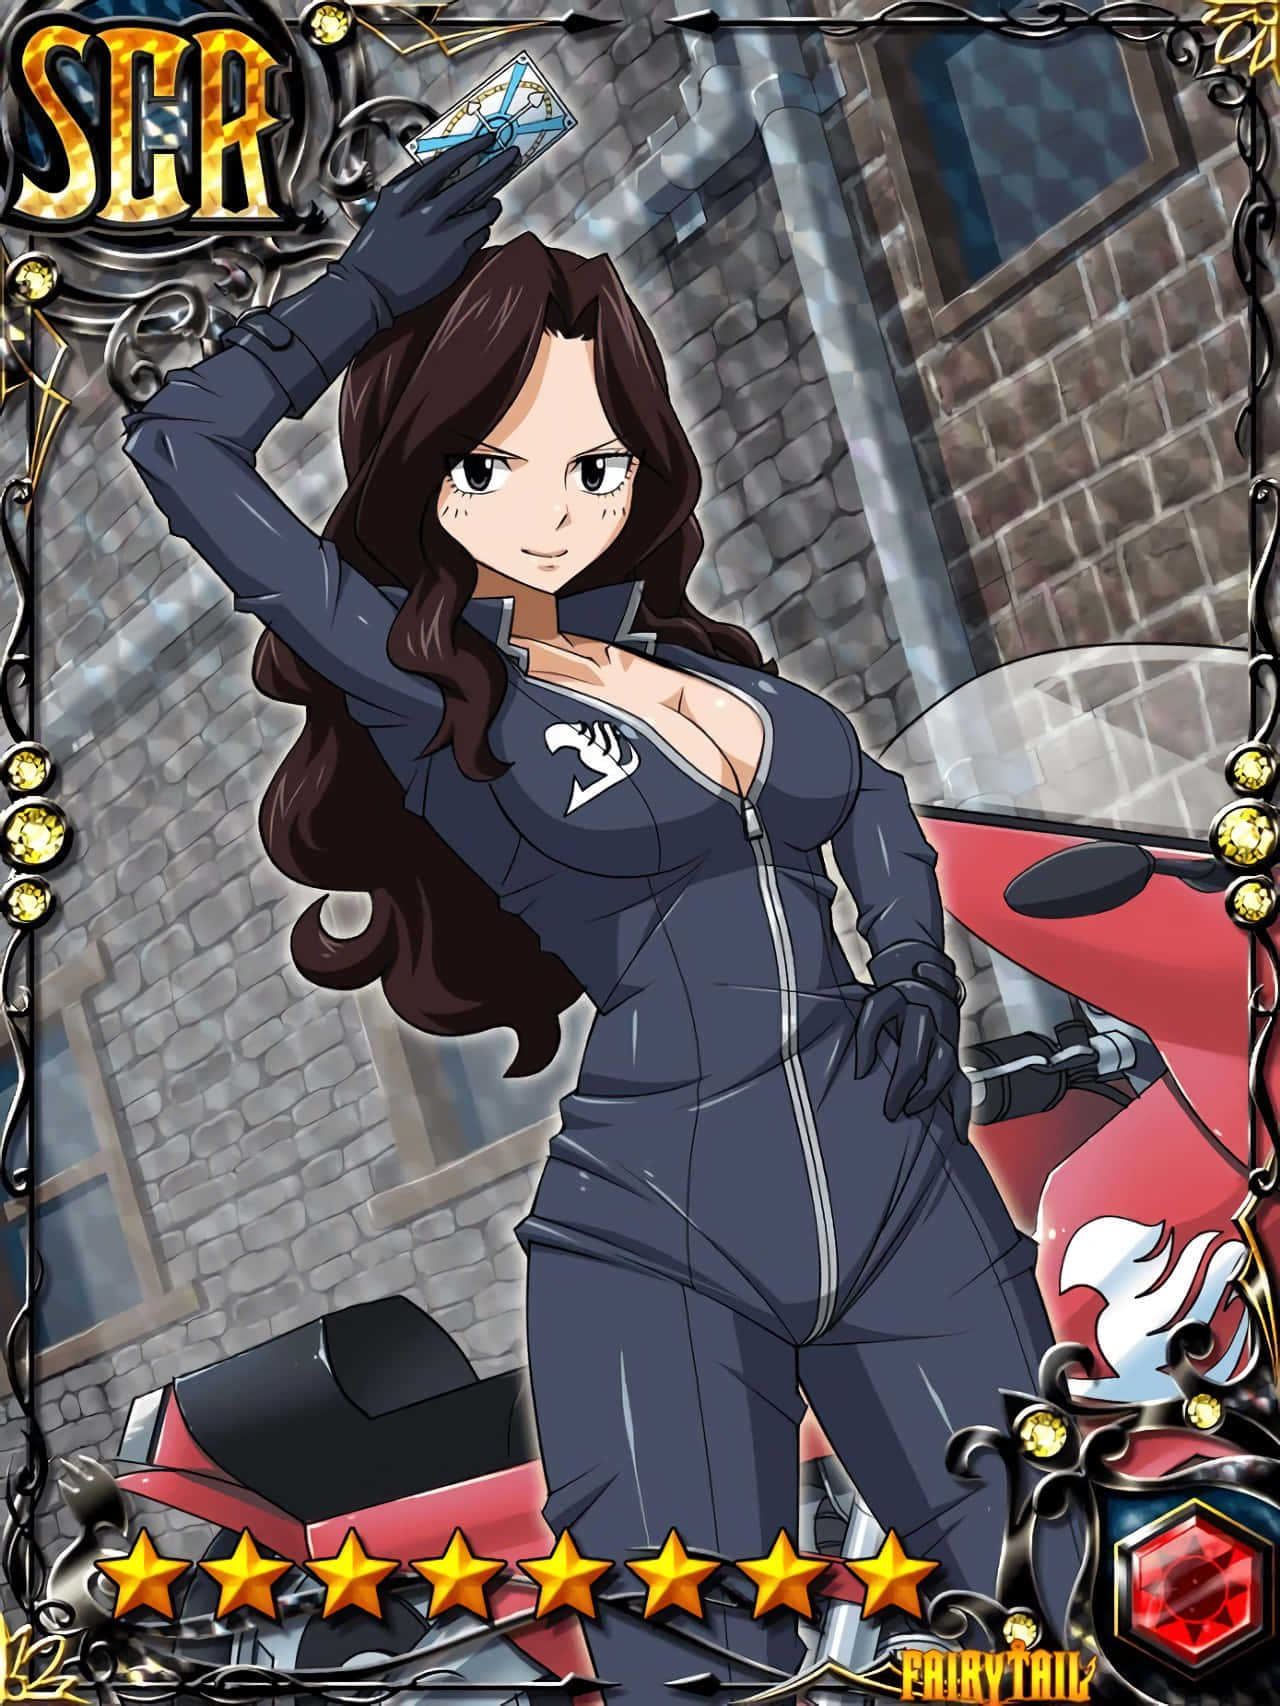 Cana Alberona with magical cards in action Wallpaper